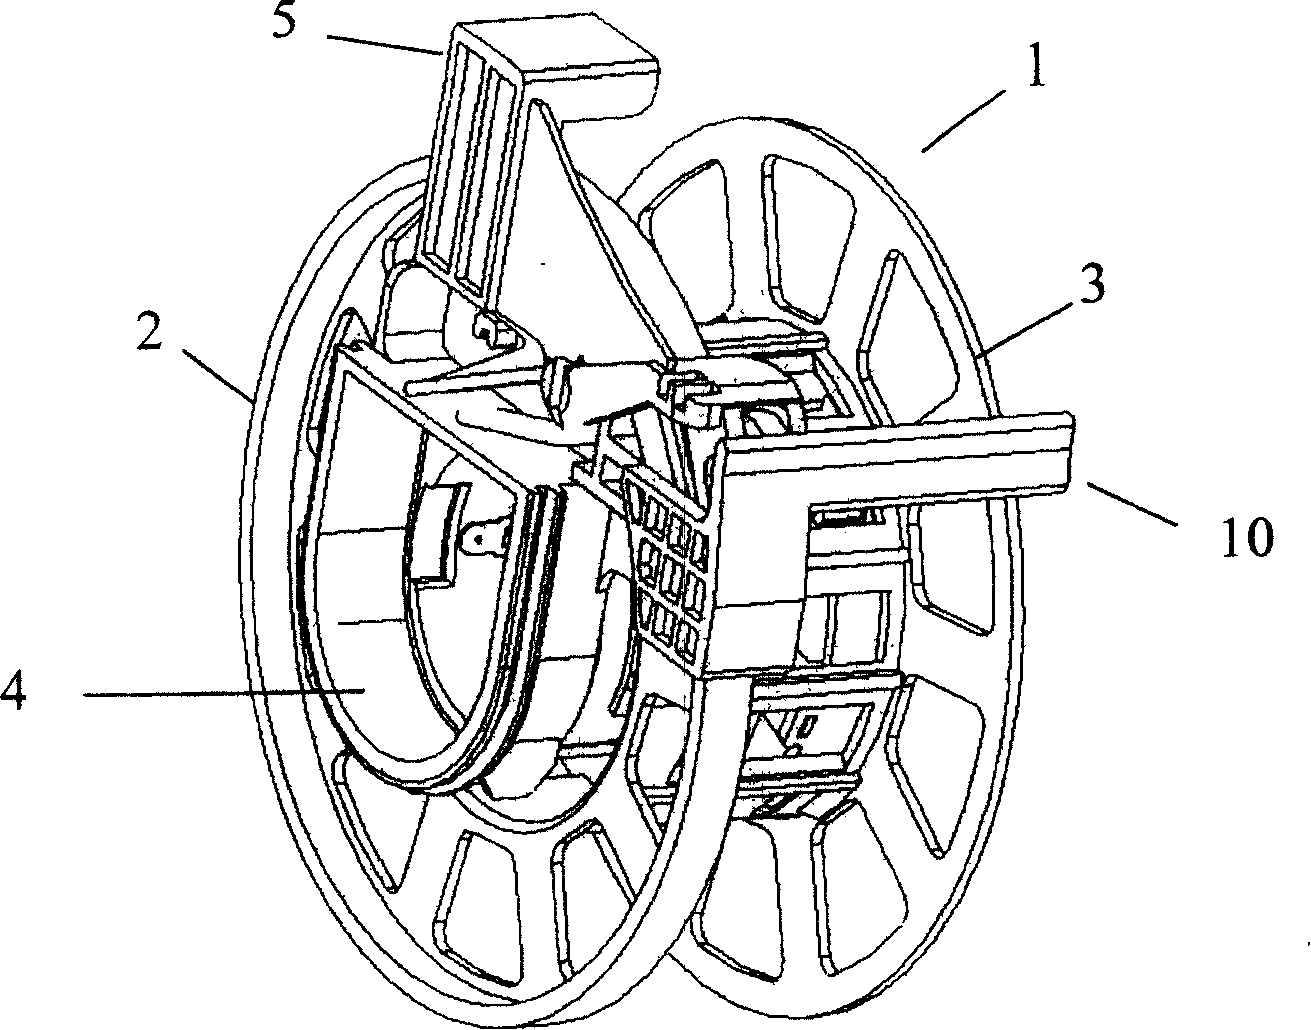 Braking structure of coil winder of suction sweeper